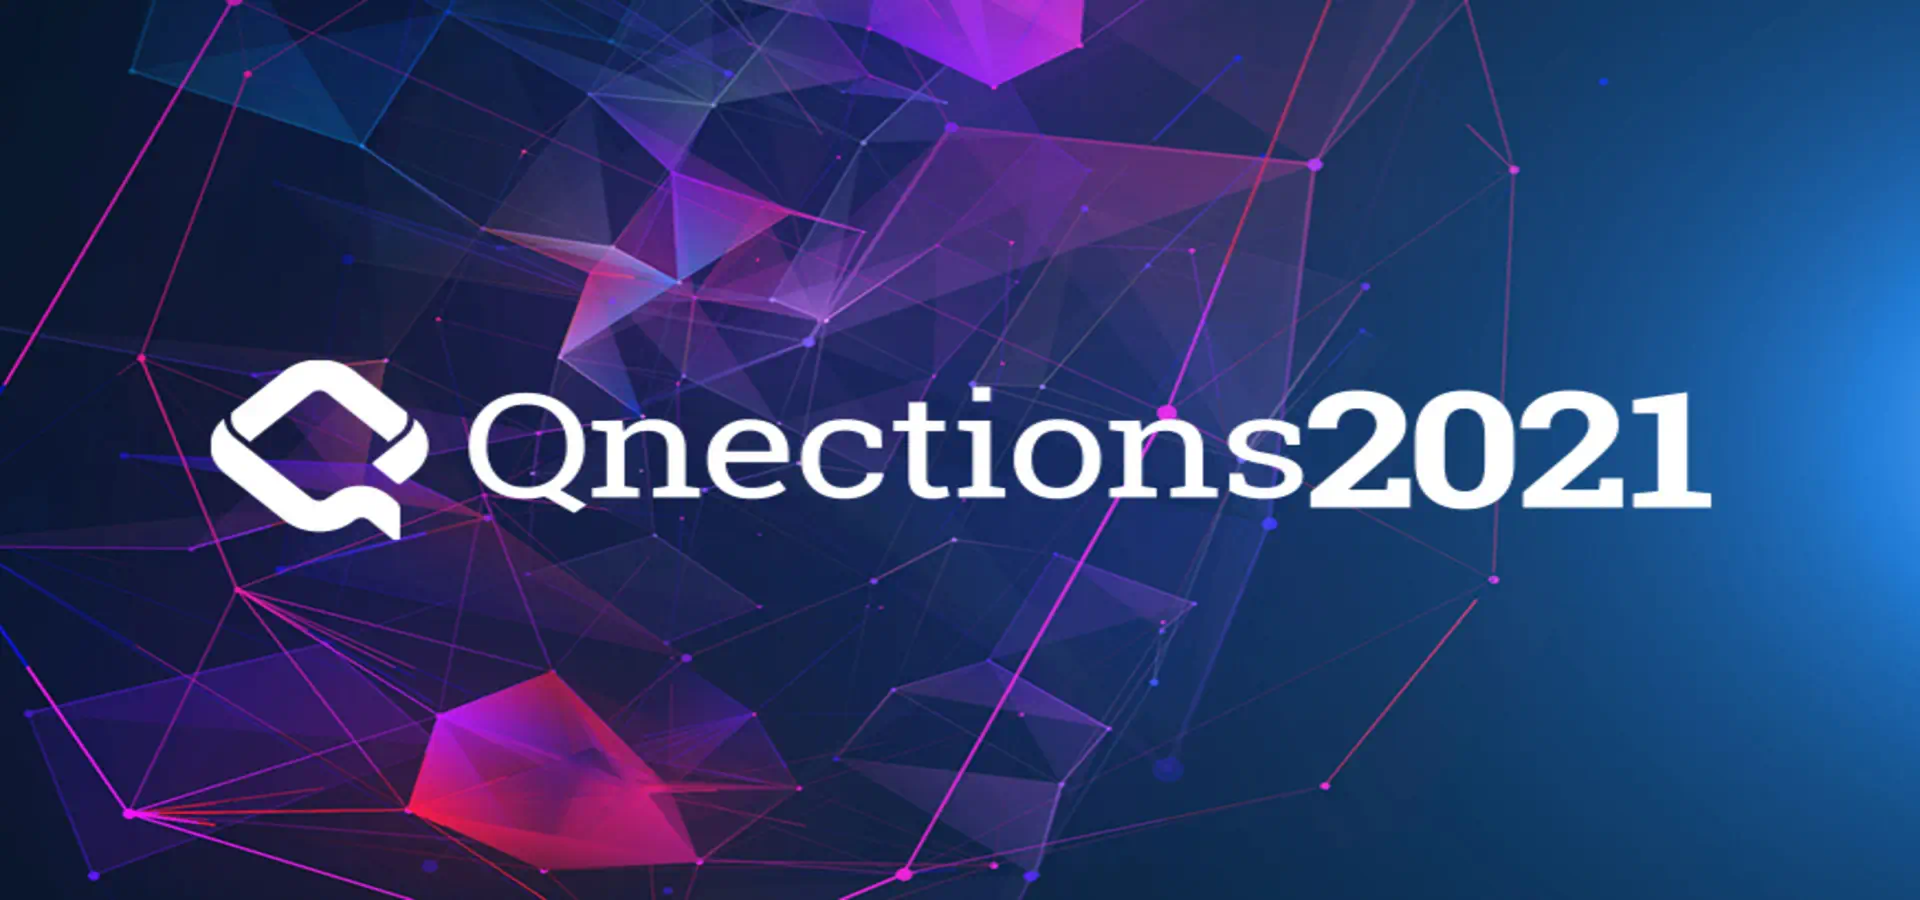 Save The Date For Qnections Live 2021 3 Reasons To Attend - Quorum Blog